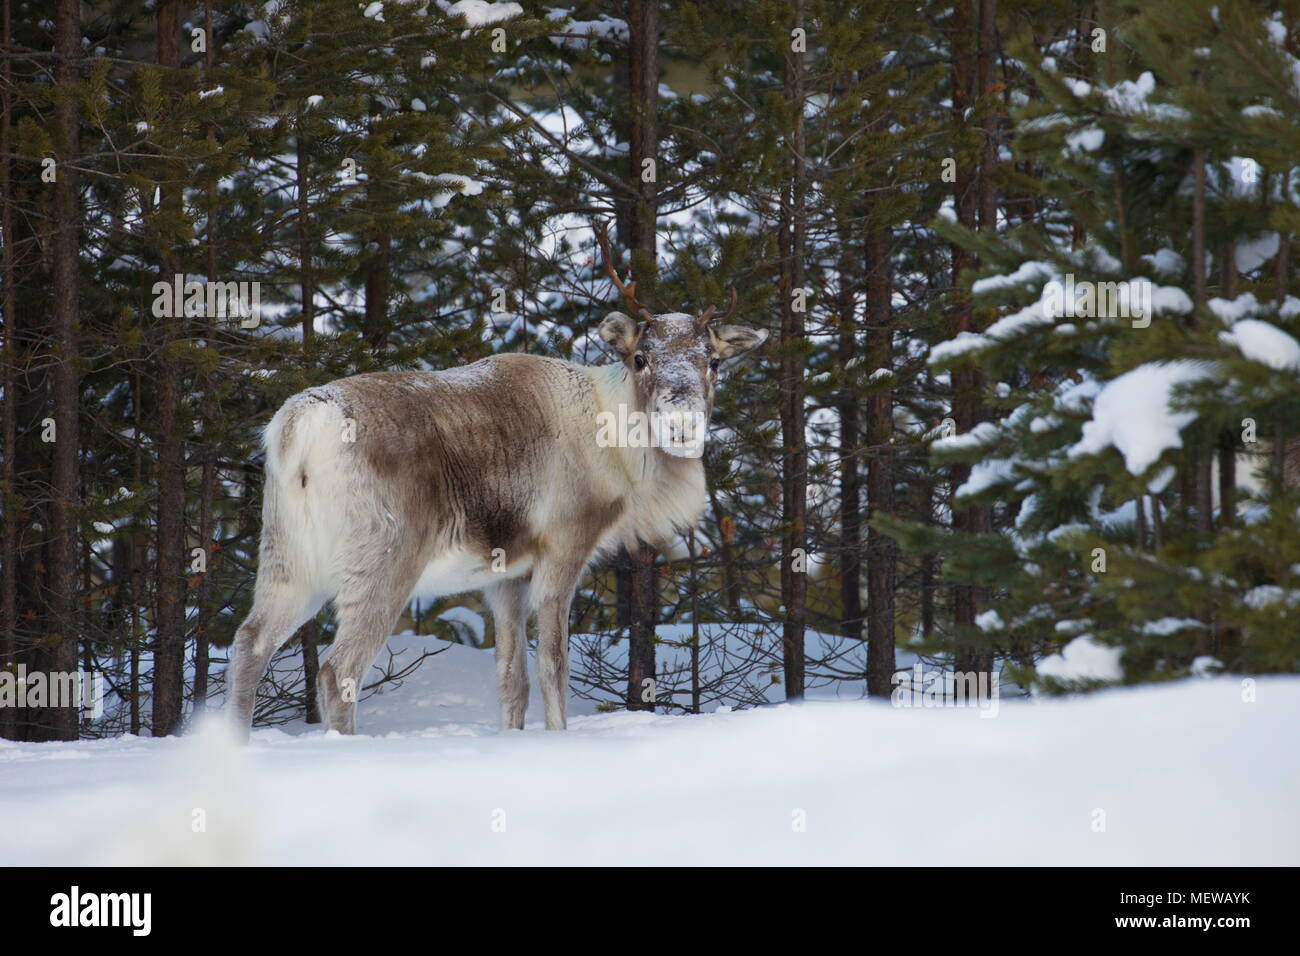 A reindeer is standing in a snow-covered softwood forest in Swedish Lapland, looking at the camera. Stock Photo